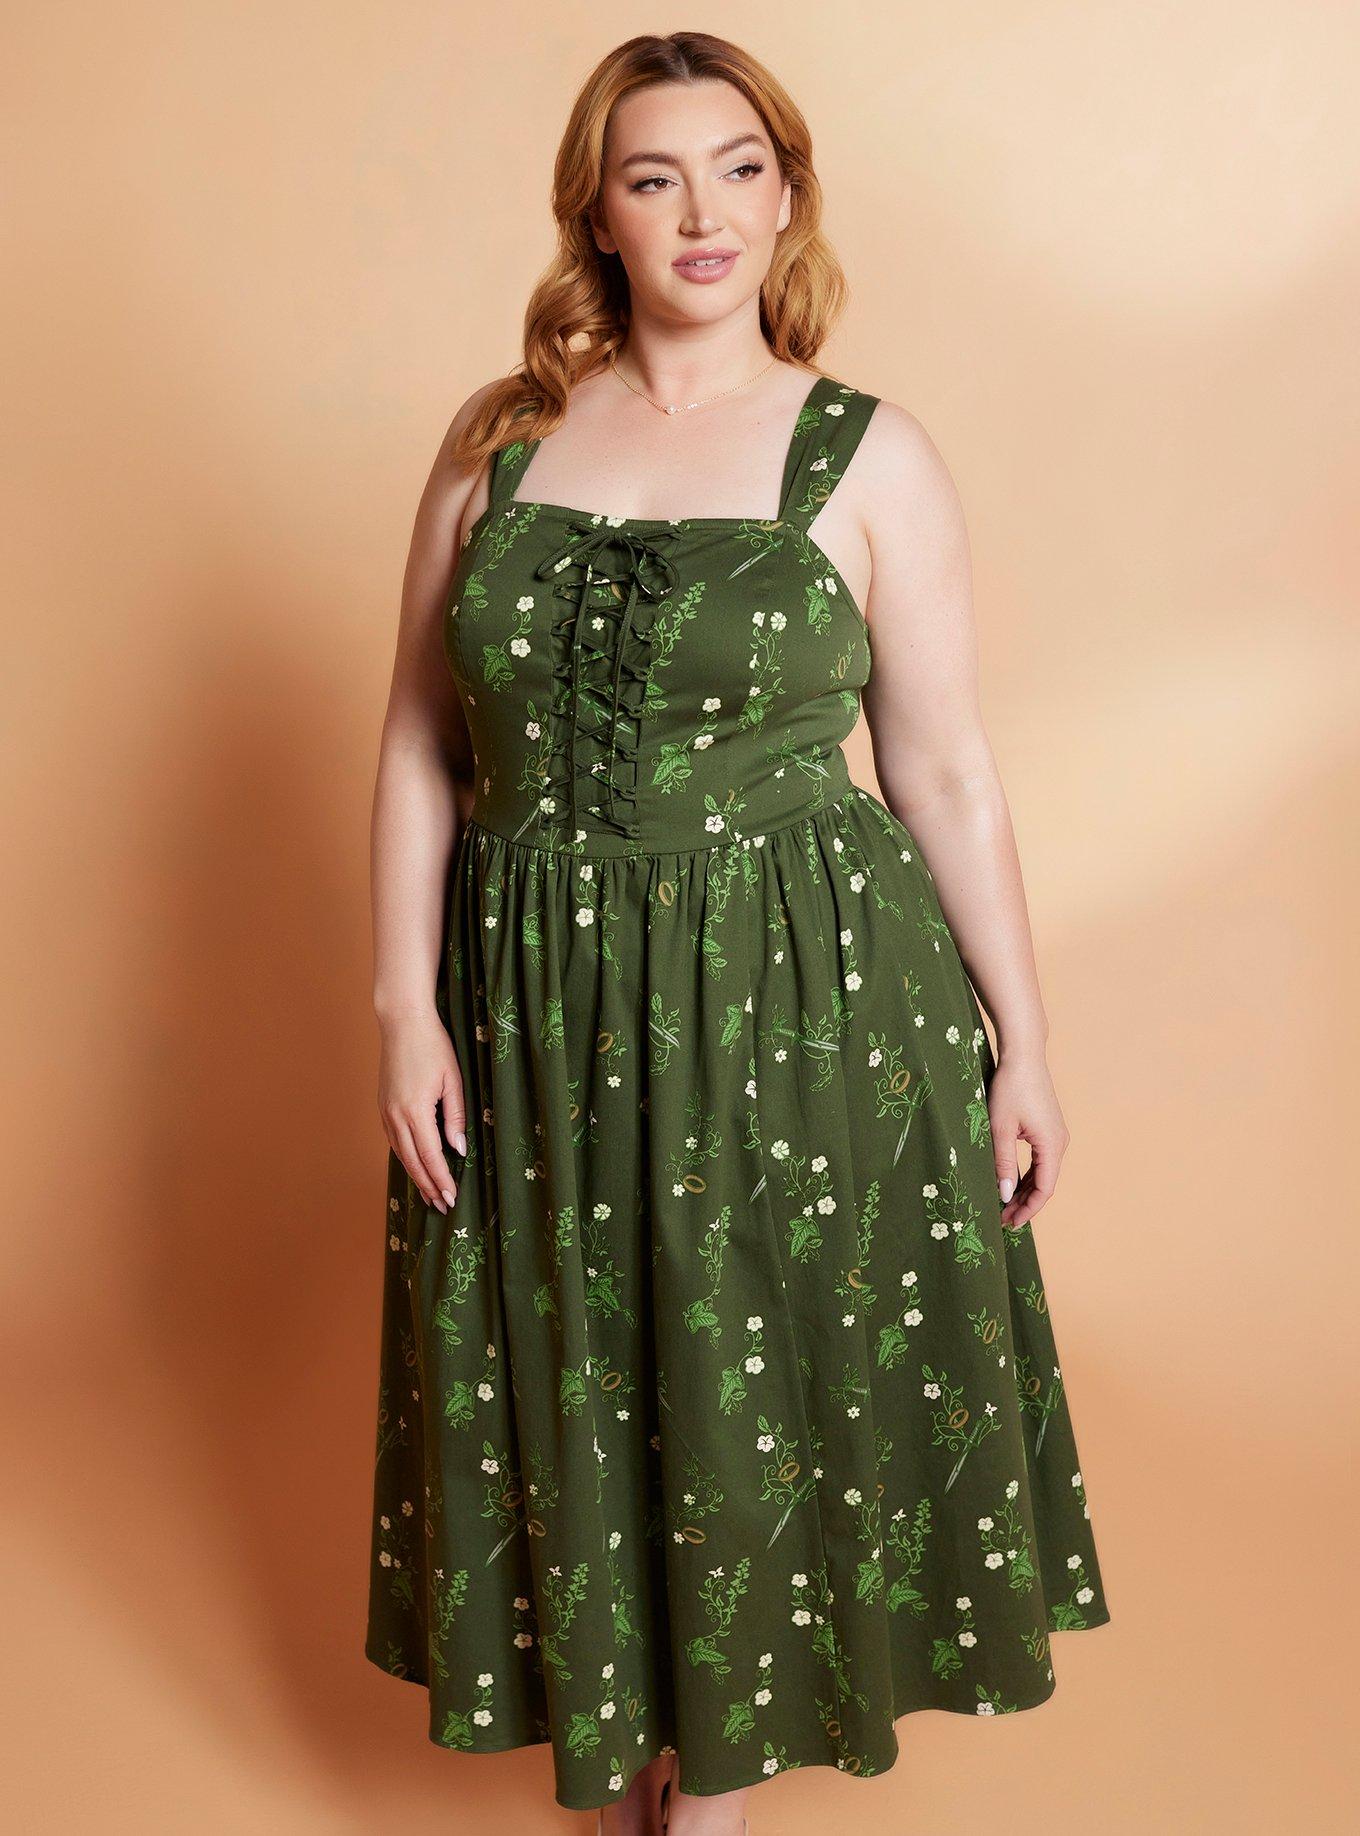 Her Universe The Lord Of The Rings Icons Lace-Up Dress Plus Size Her Universe Exclusive, MULTI, hi-res